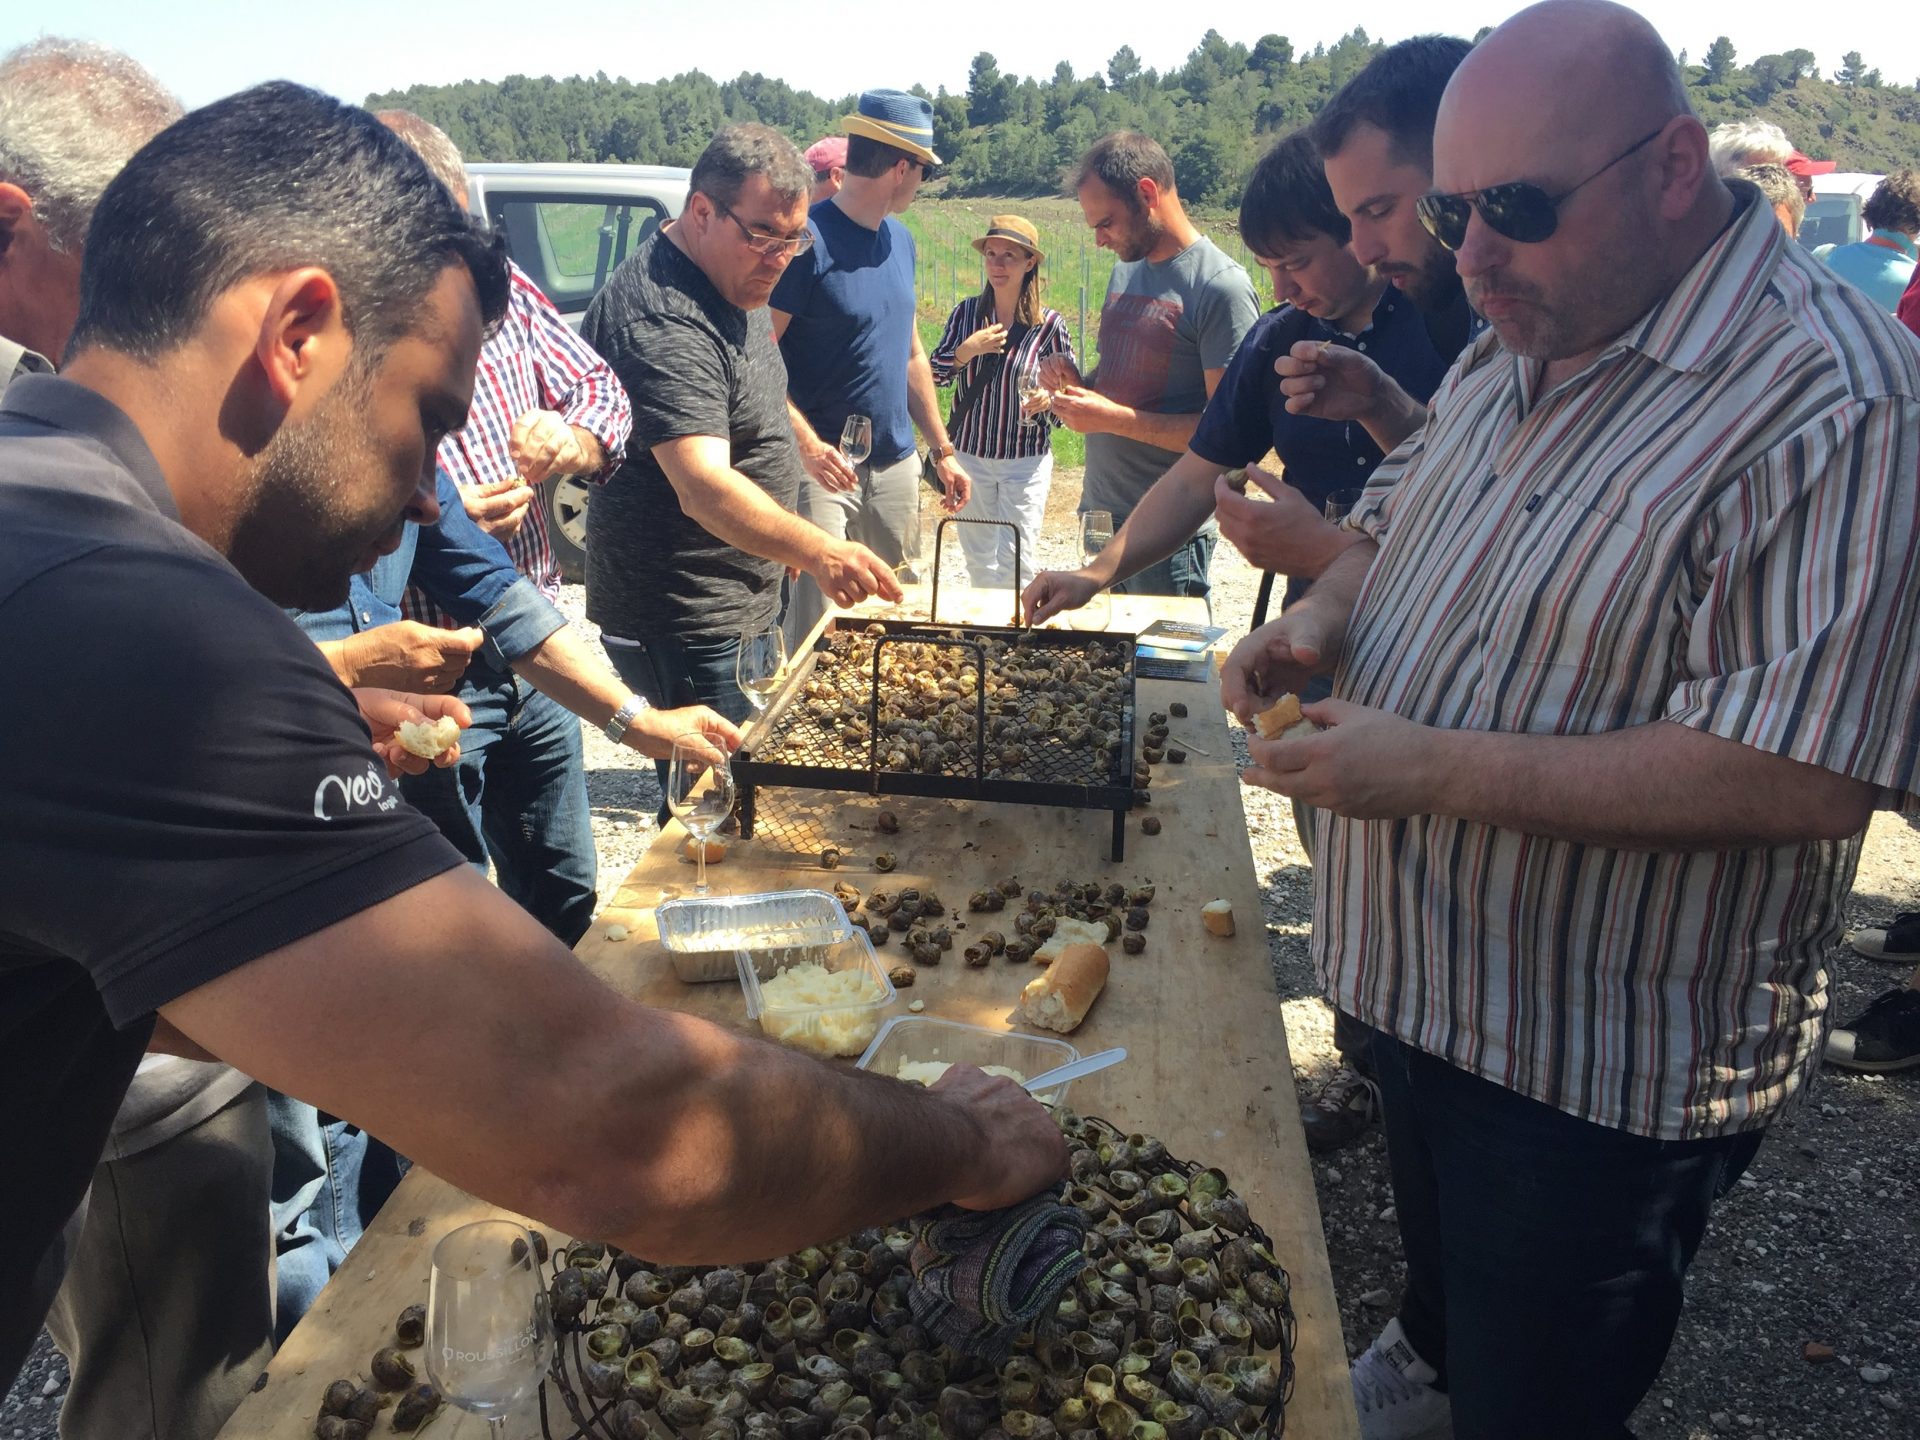 Journalists from all over the globe break bread (and eat snails) with Roussillon winemakers.